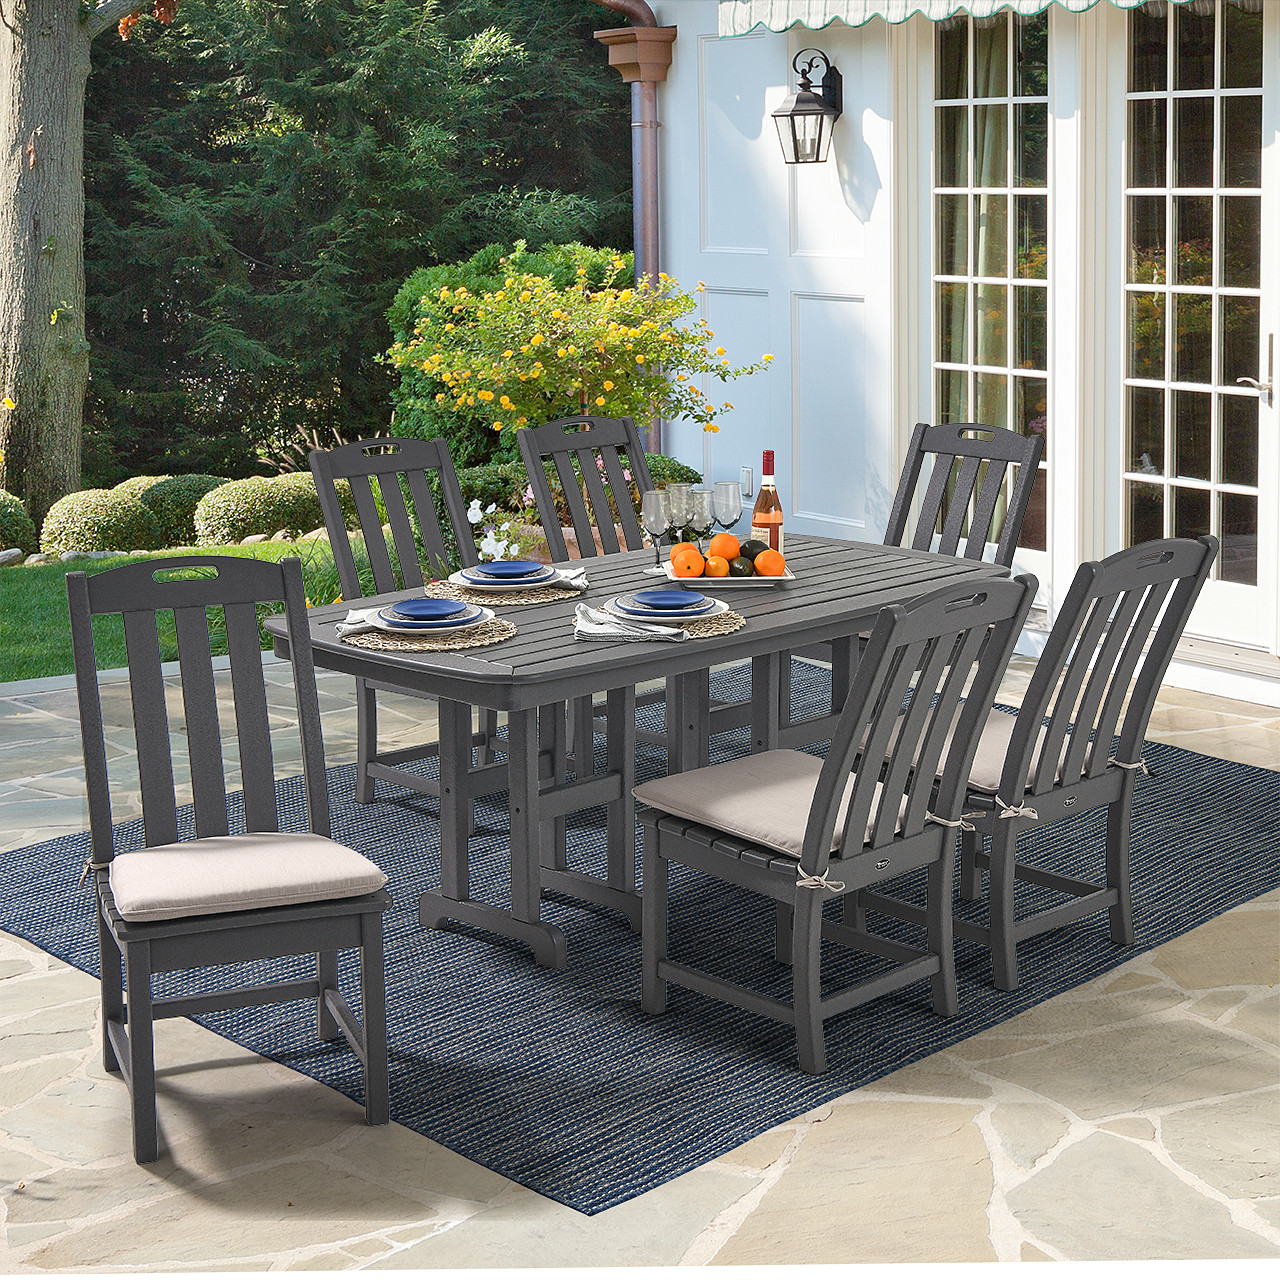 Surfside Slate Grey Polymer 7 Pc. Armless Dining Set with 72 x 37 in. Table